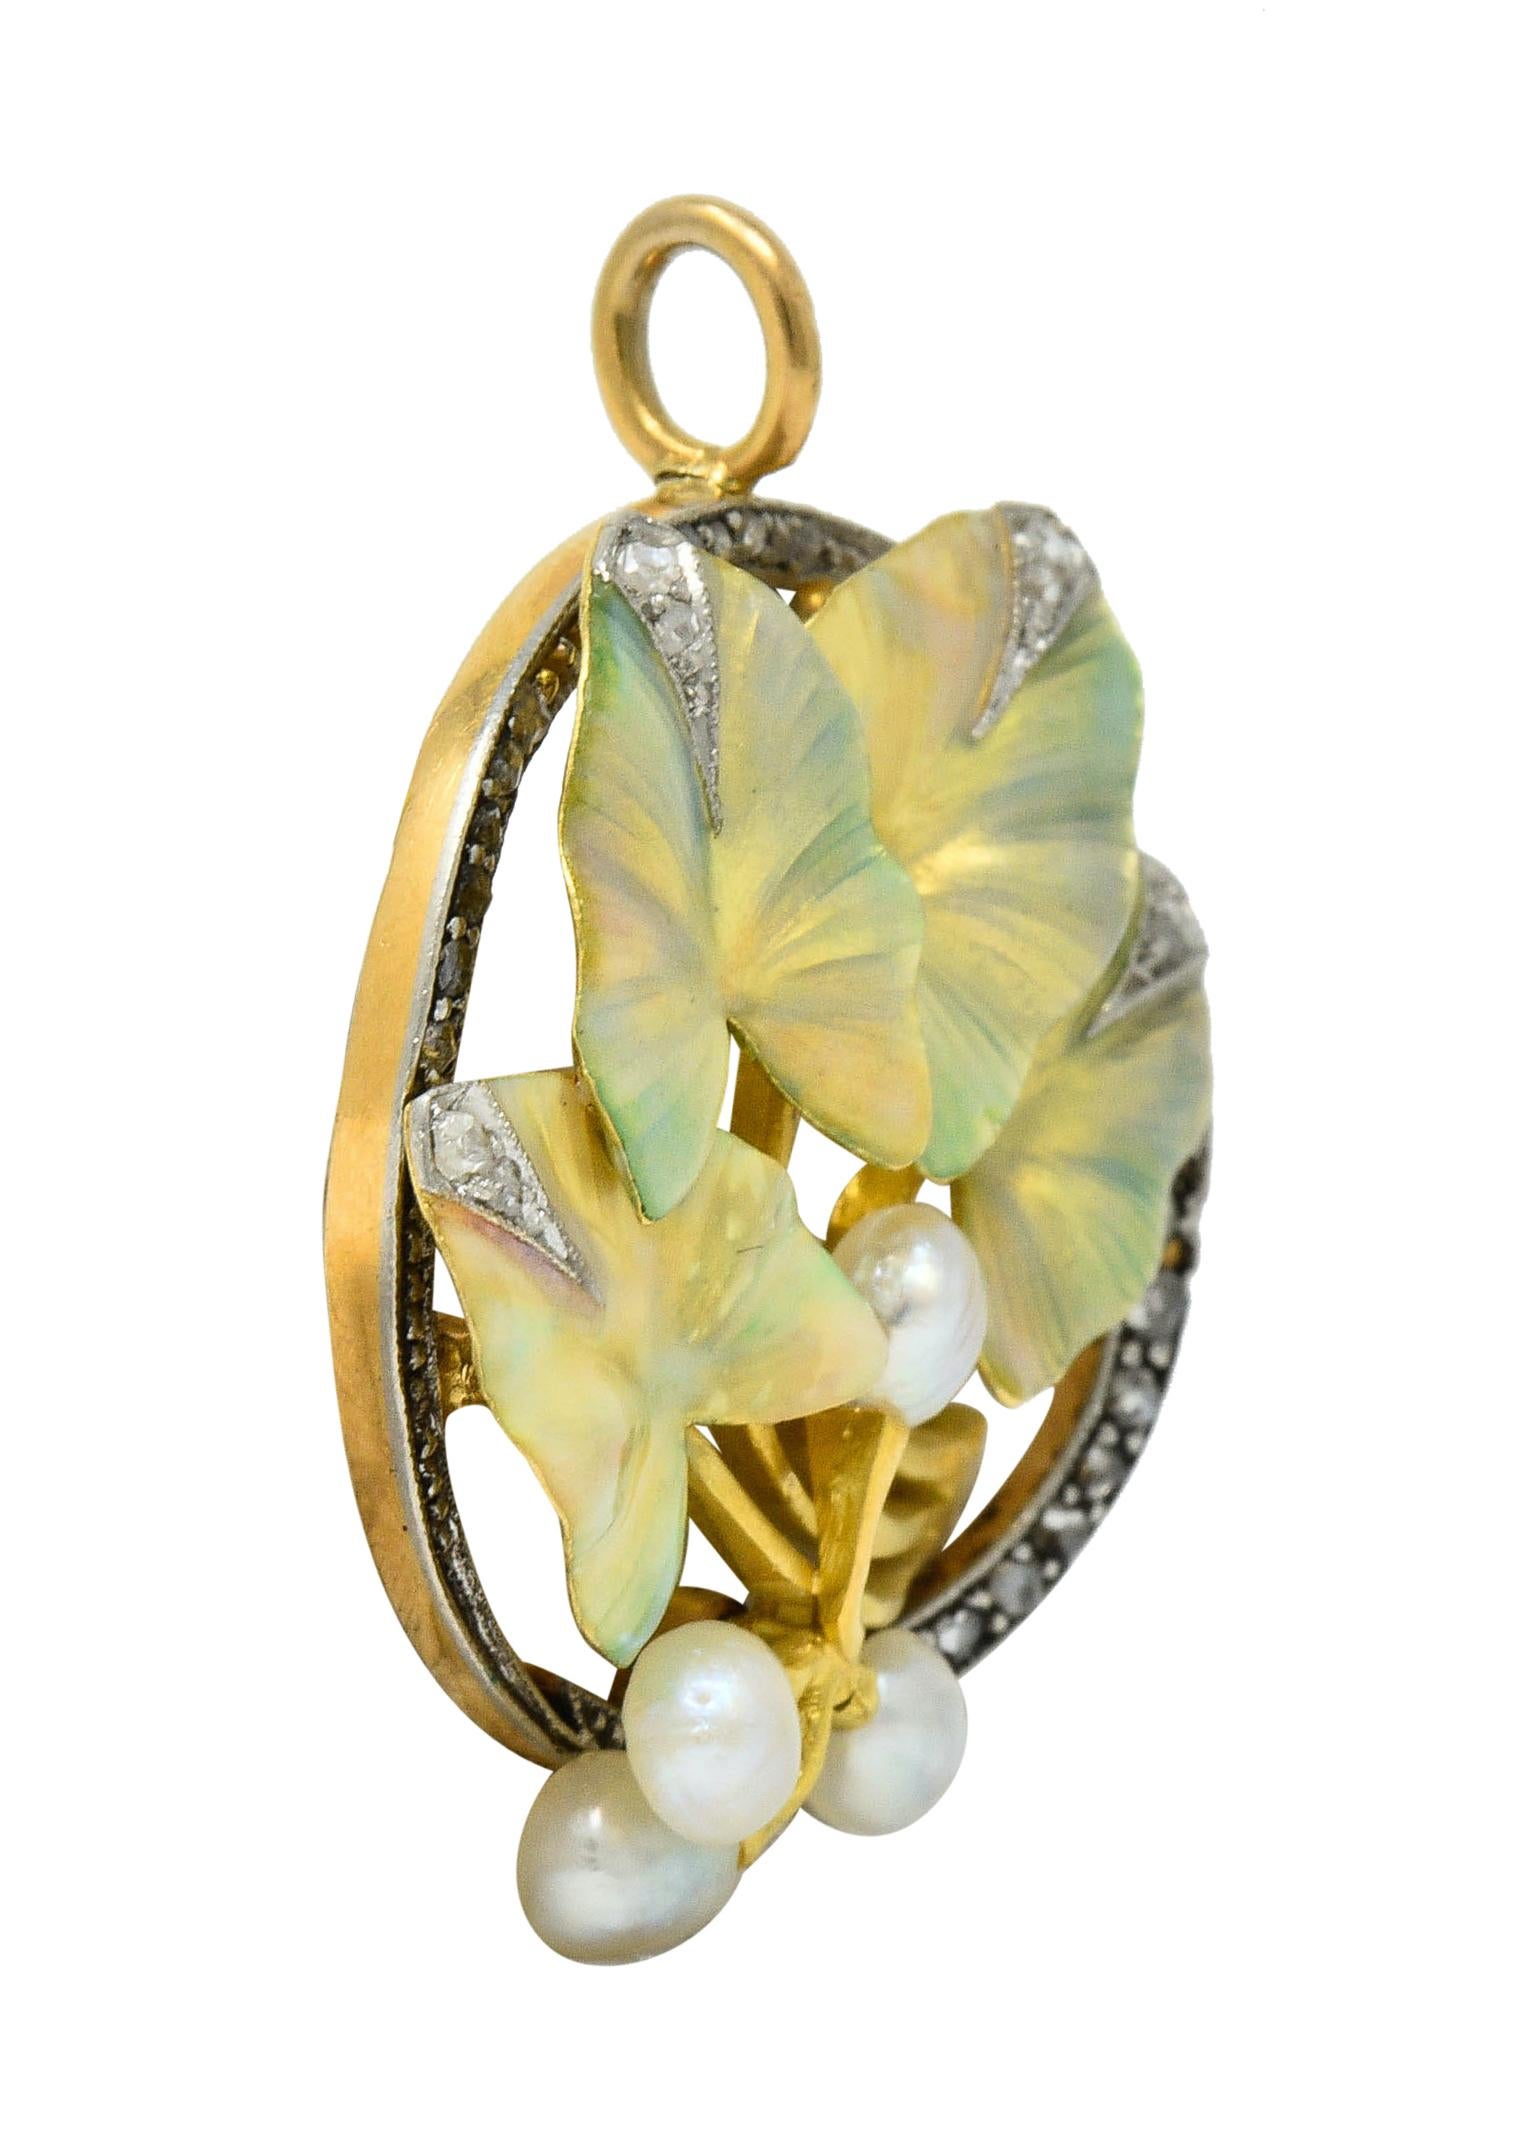 Circular platinum-topped yellow gold brooch centers flourishing green gold ivy leaves

Glossed with pastel and iridescent enamel; exhibiting no loss

With a bushel of 4.0 mm semi-round pearls, well-matched with white body color and strong